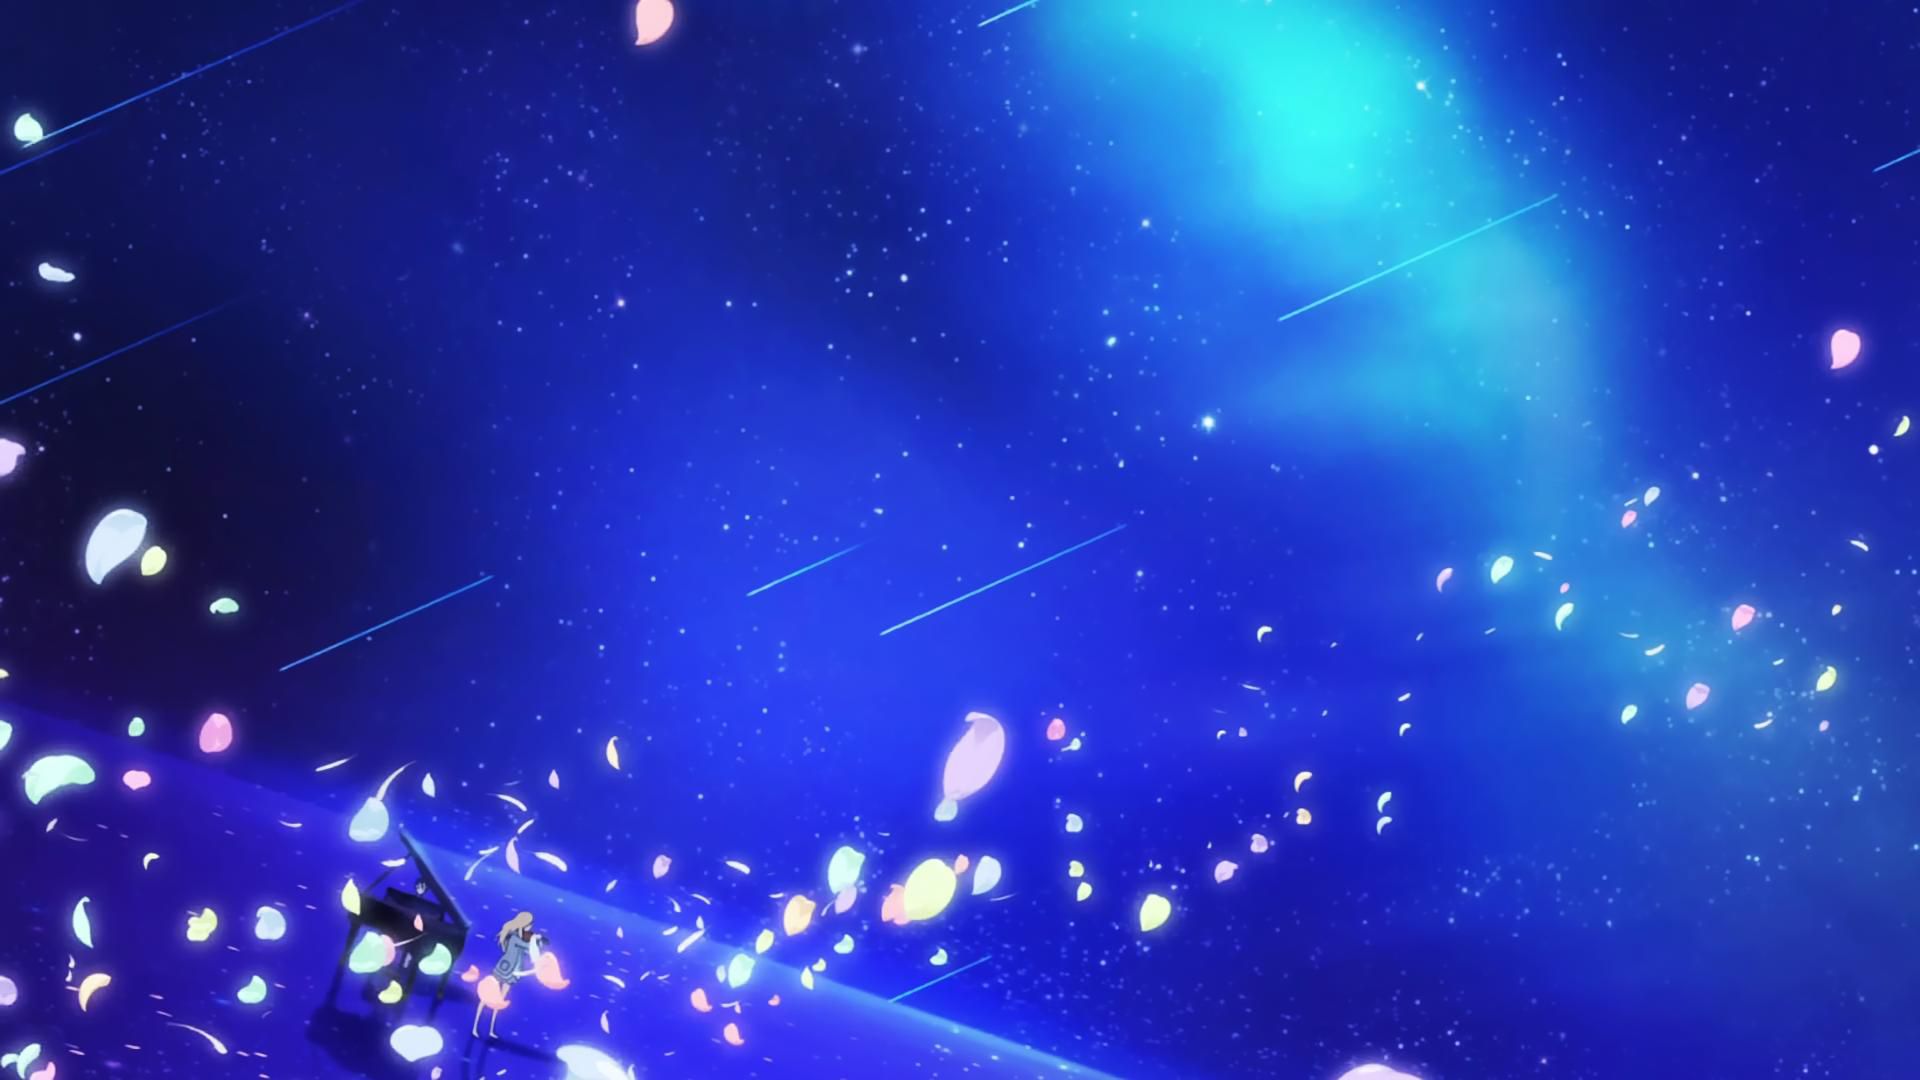 240+ Anime Sky HD Wallpapers and Backgrounds